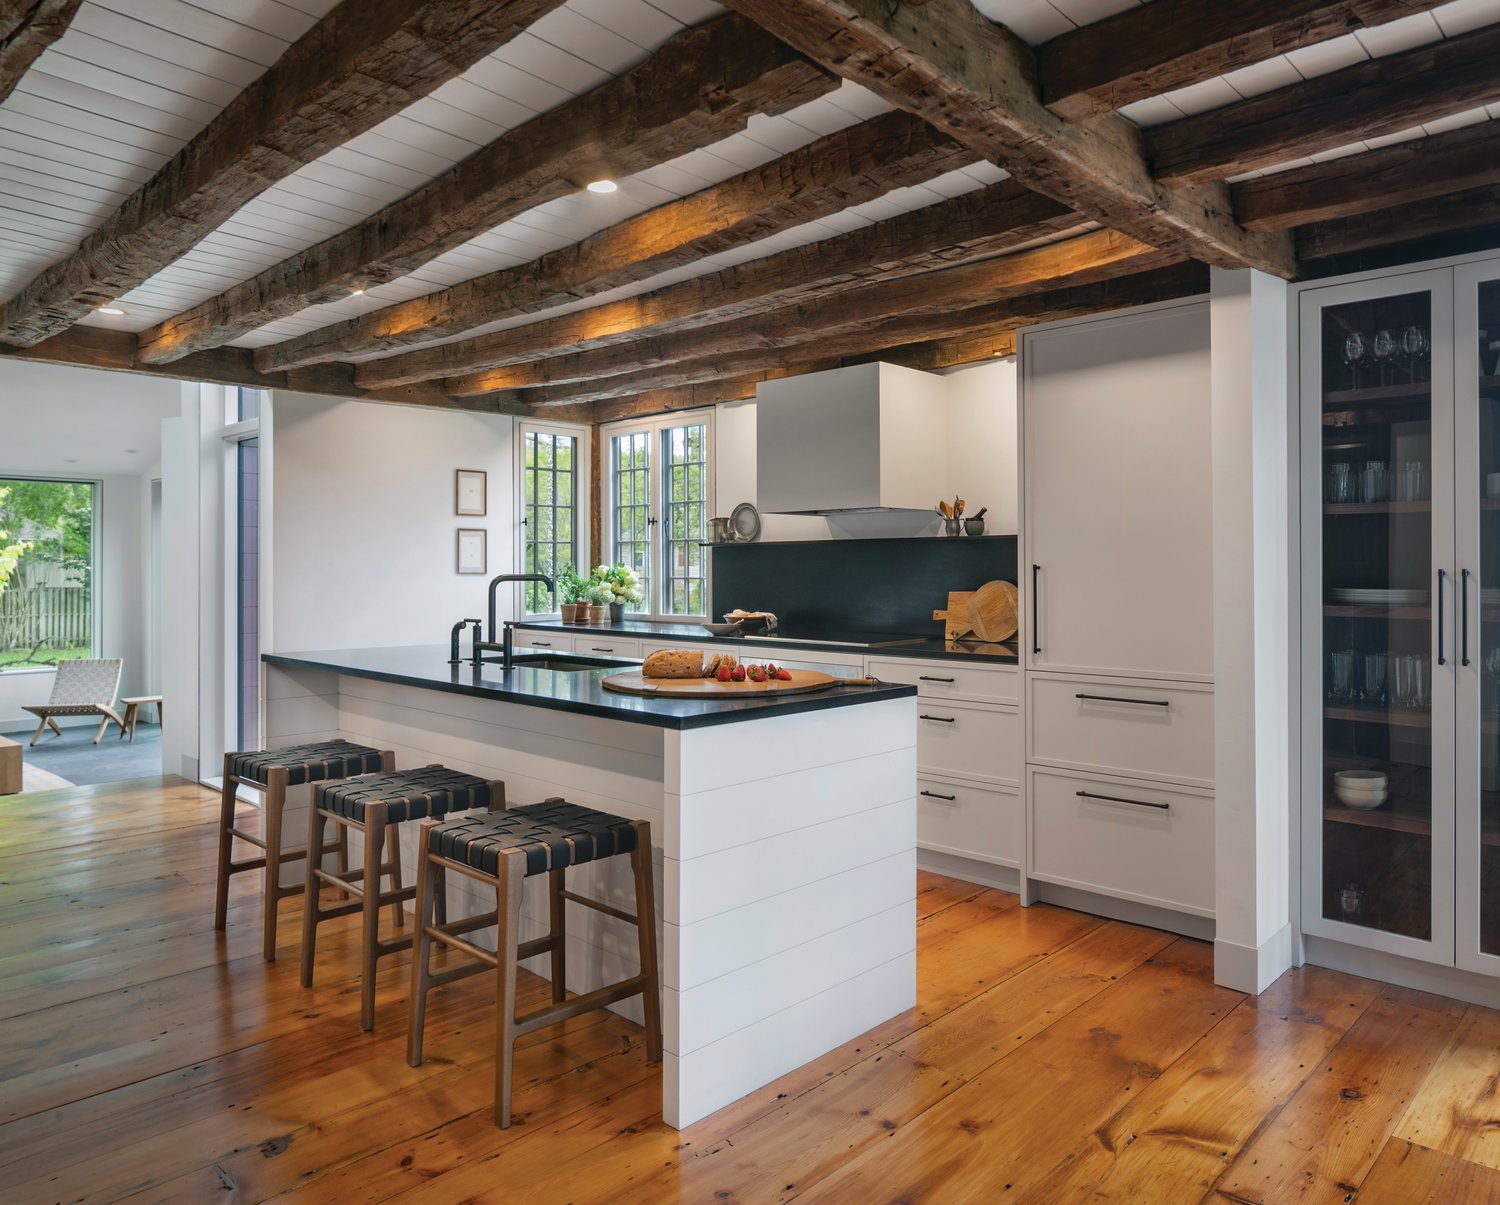 The kitchen is the perfect representation of the old-meets-new concept, with original beams and wide, plank floor boards framing a luxurious but simple, modern kitchen.